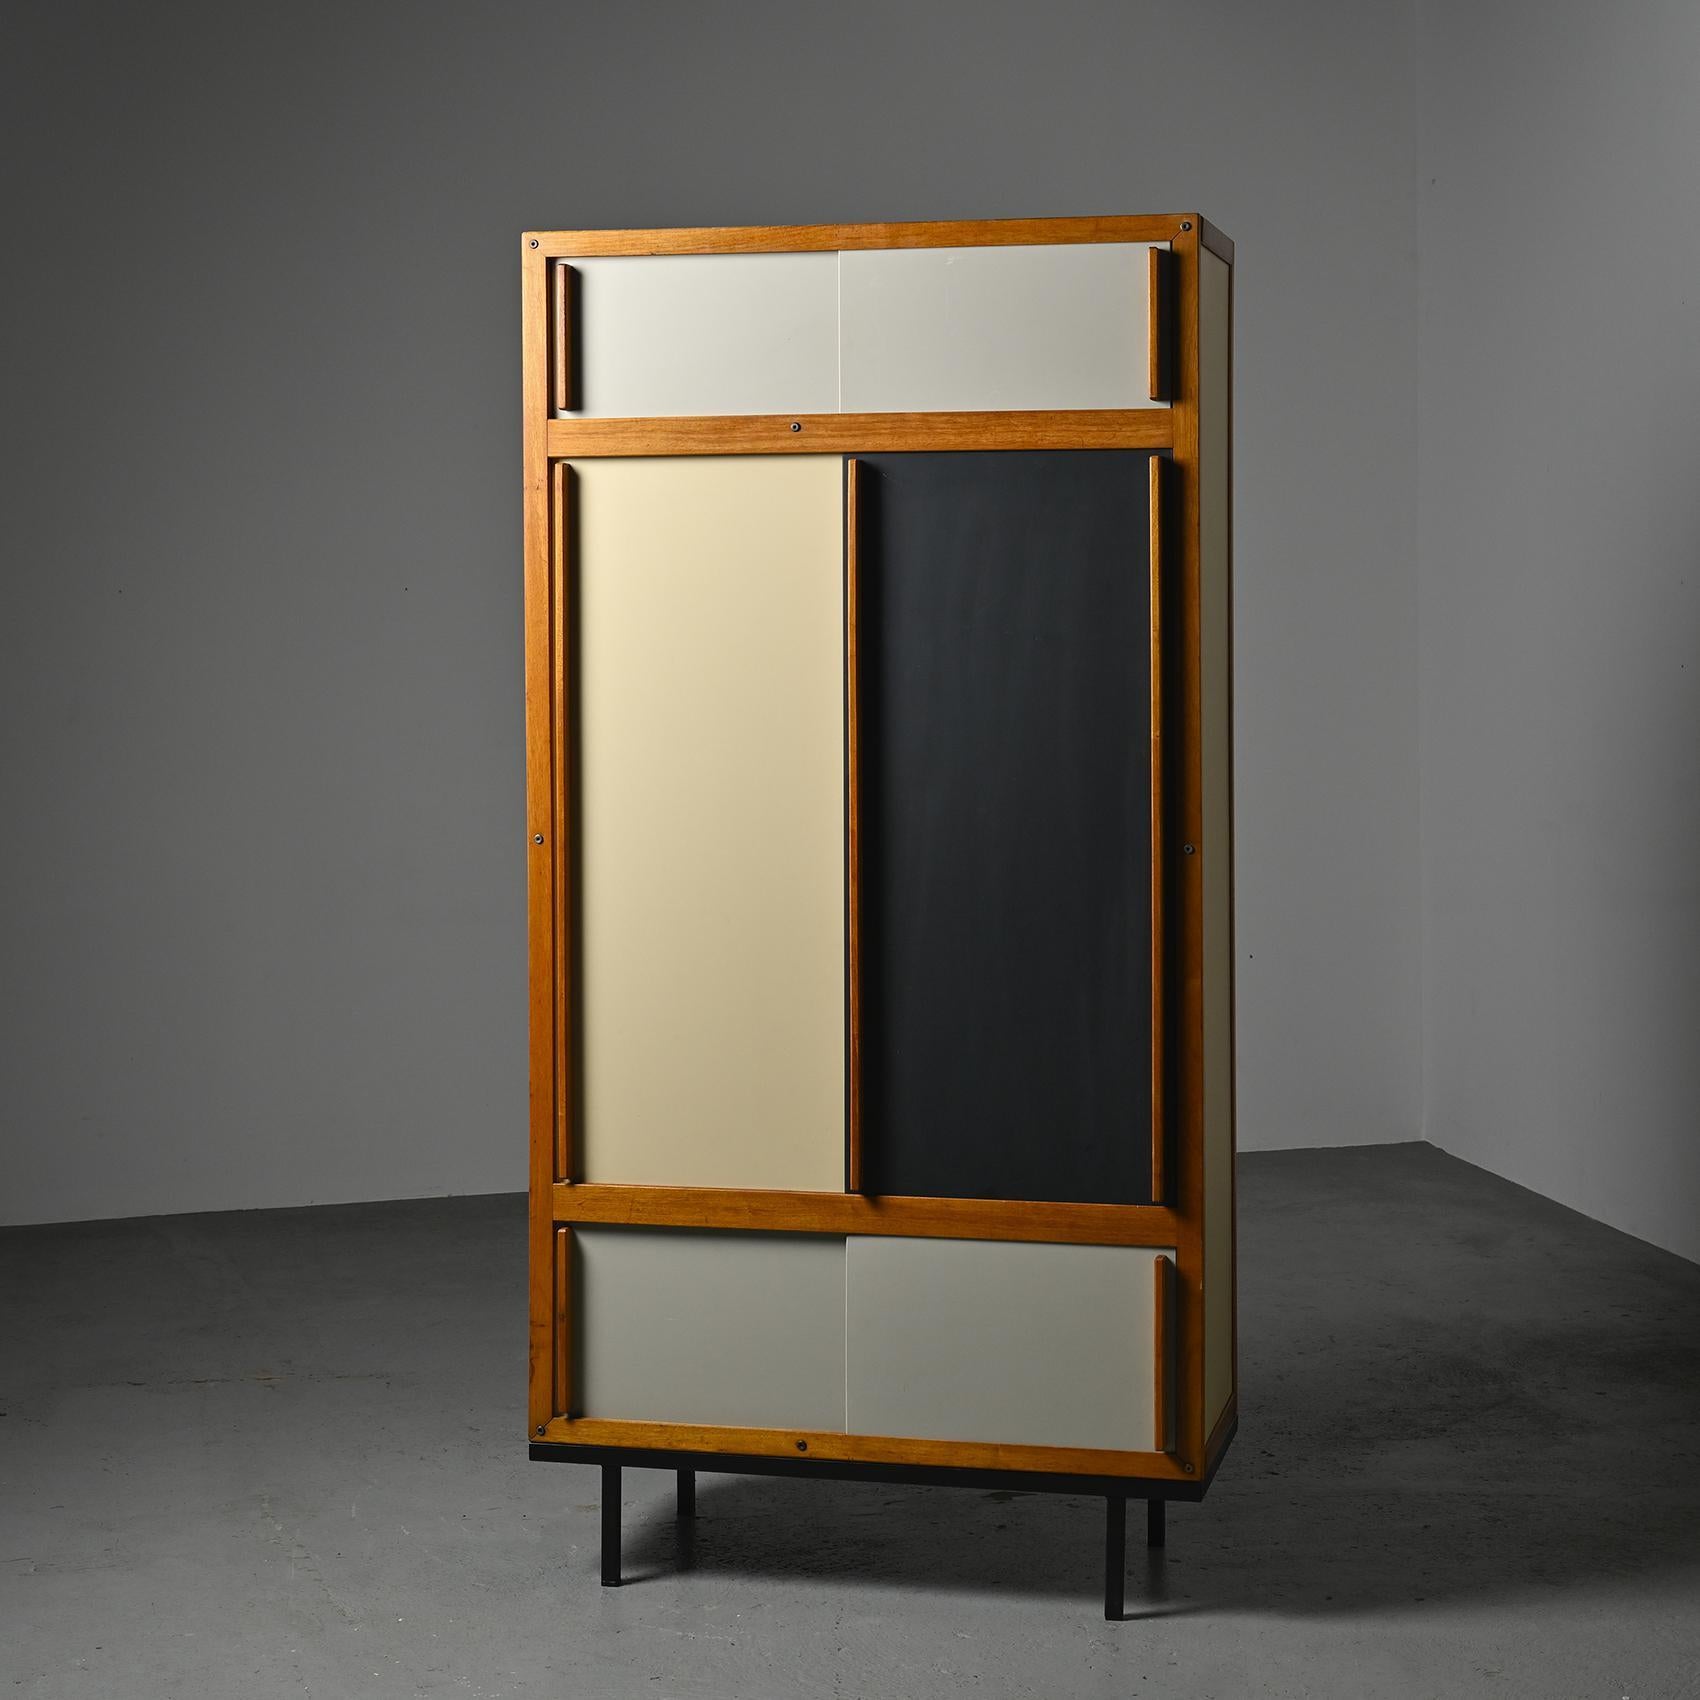   Vintage cabinet with a modernist and minimalist touch by André Sornay, cabinetmaker and designer, produced in Lyon by Meubles Sornay circa 1960.

An iconic design, the mahogany structure accommodates sliding doors lacquered from origin in shades